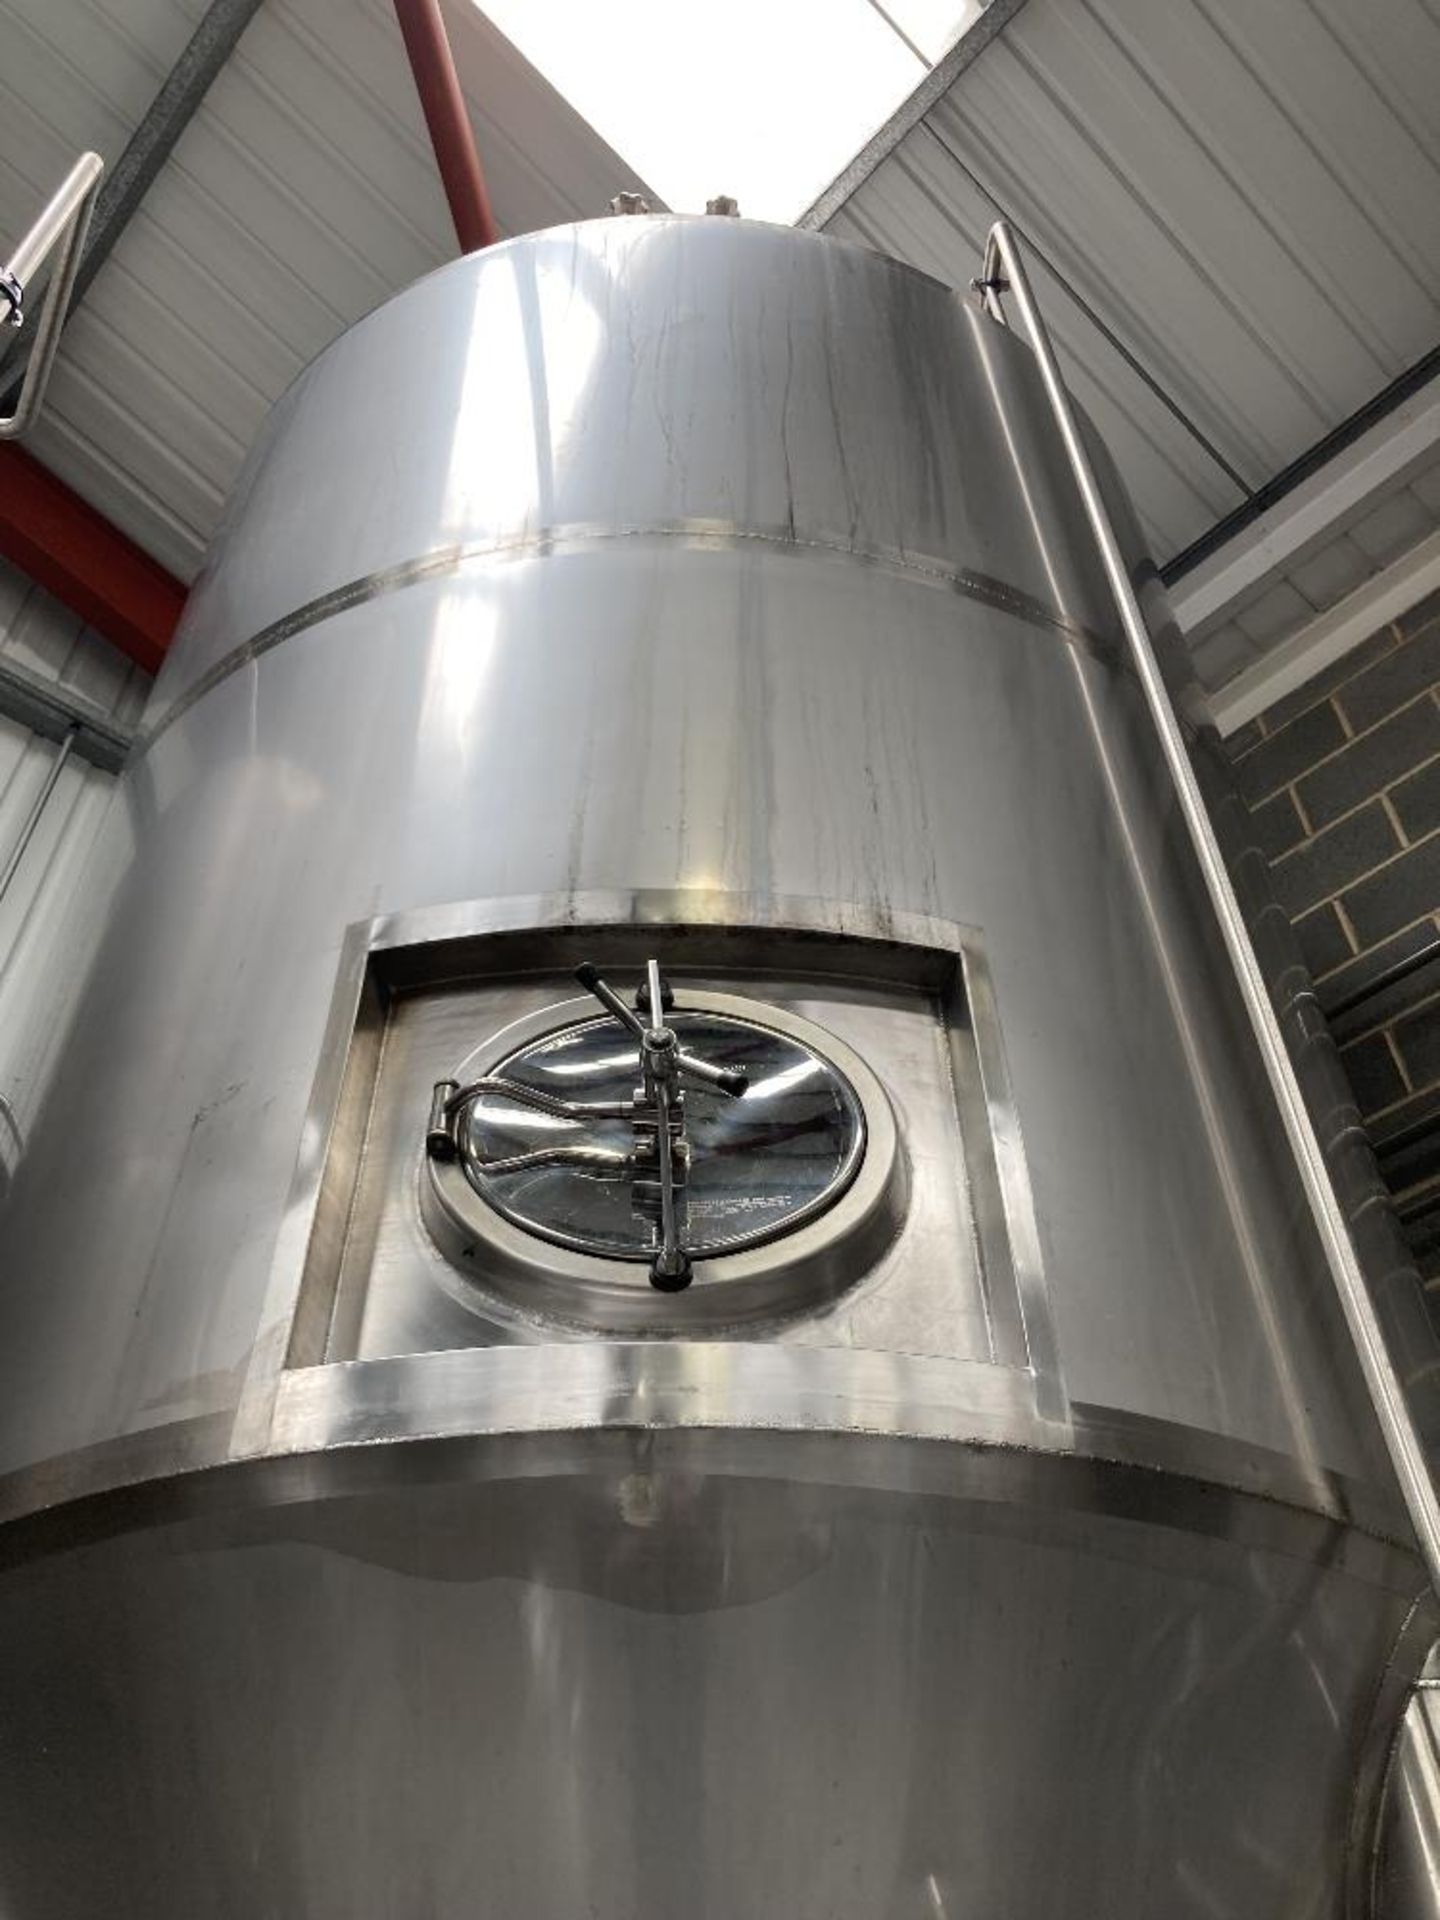 Unbranded stainless steel pressurised conical vessel - Image 5 of 5